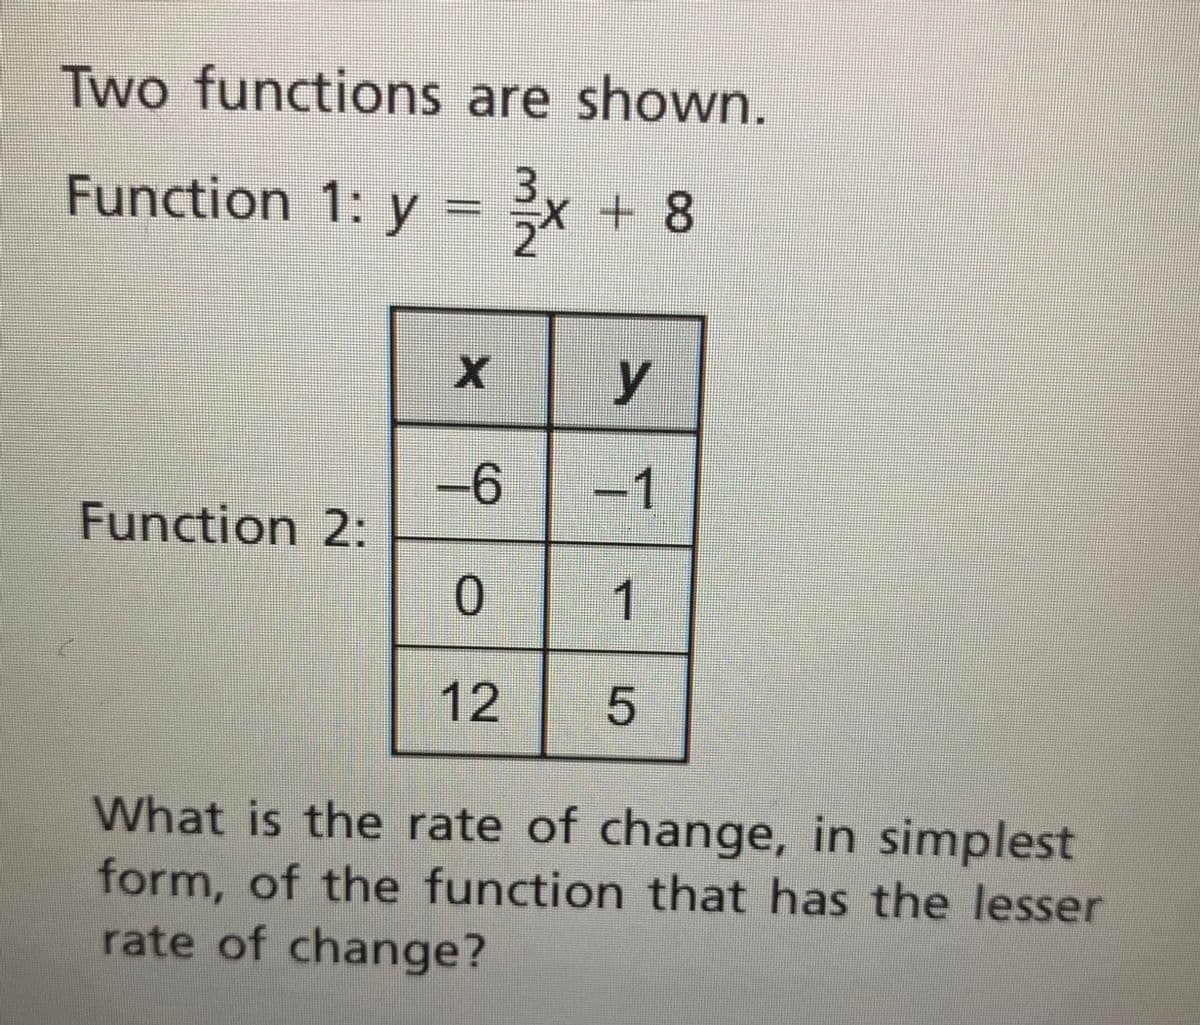 Two functions are shown.
Function 1: y = x + 8
Function 2:
X
y
-1
0 1
12 5
-6
What is the rate of change, in simplest
form, of the function that has the lesser
rate of change?